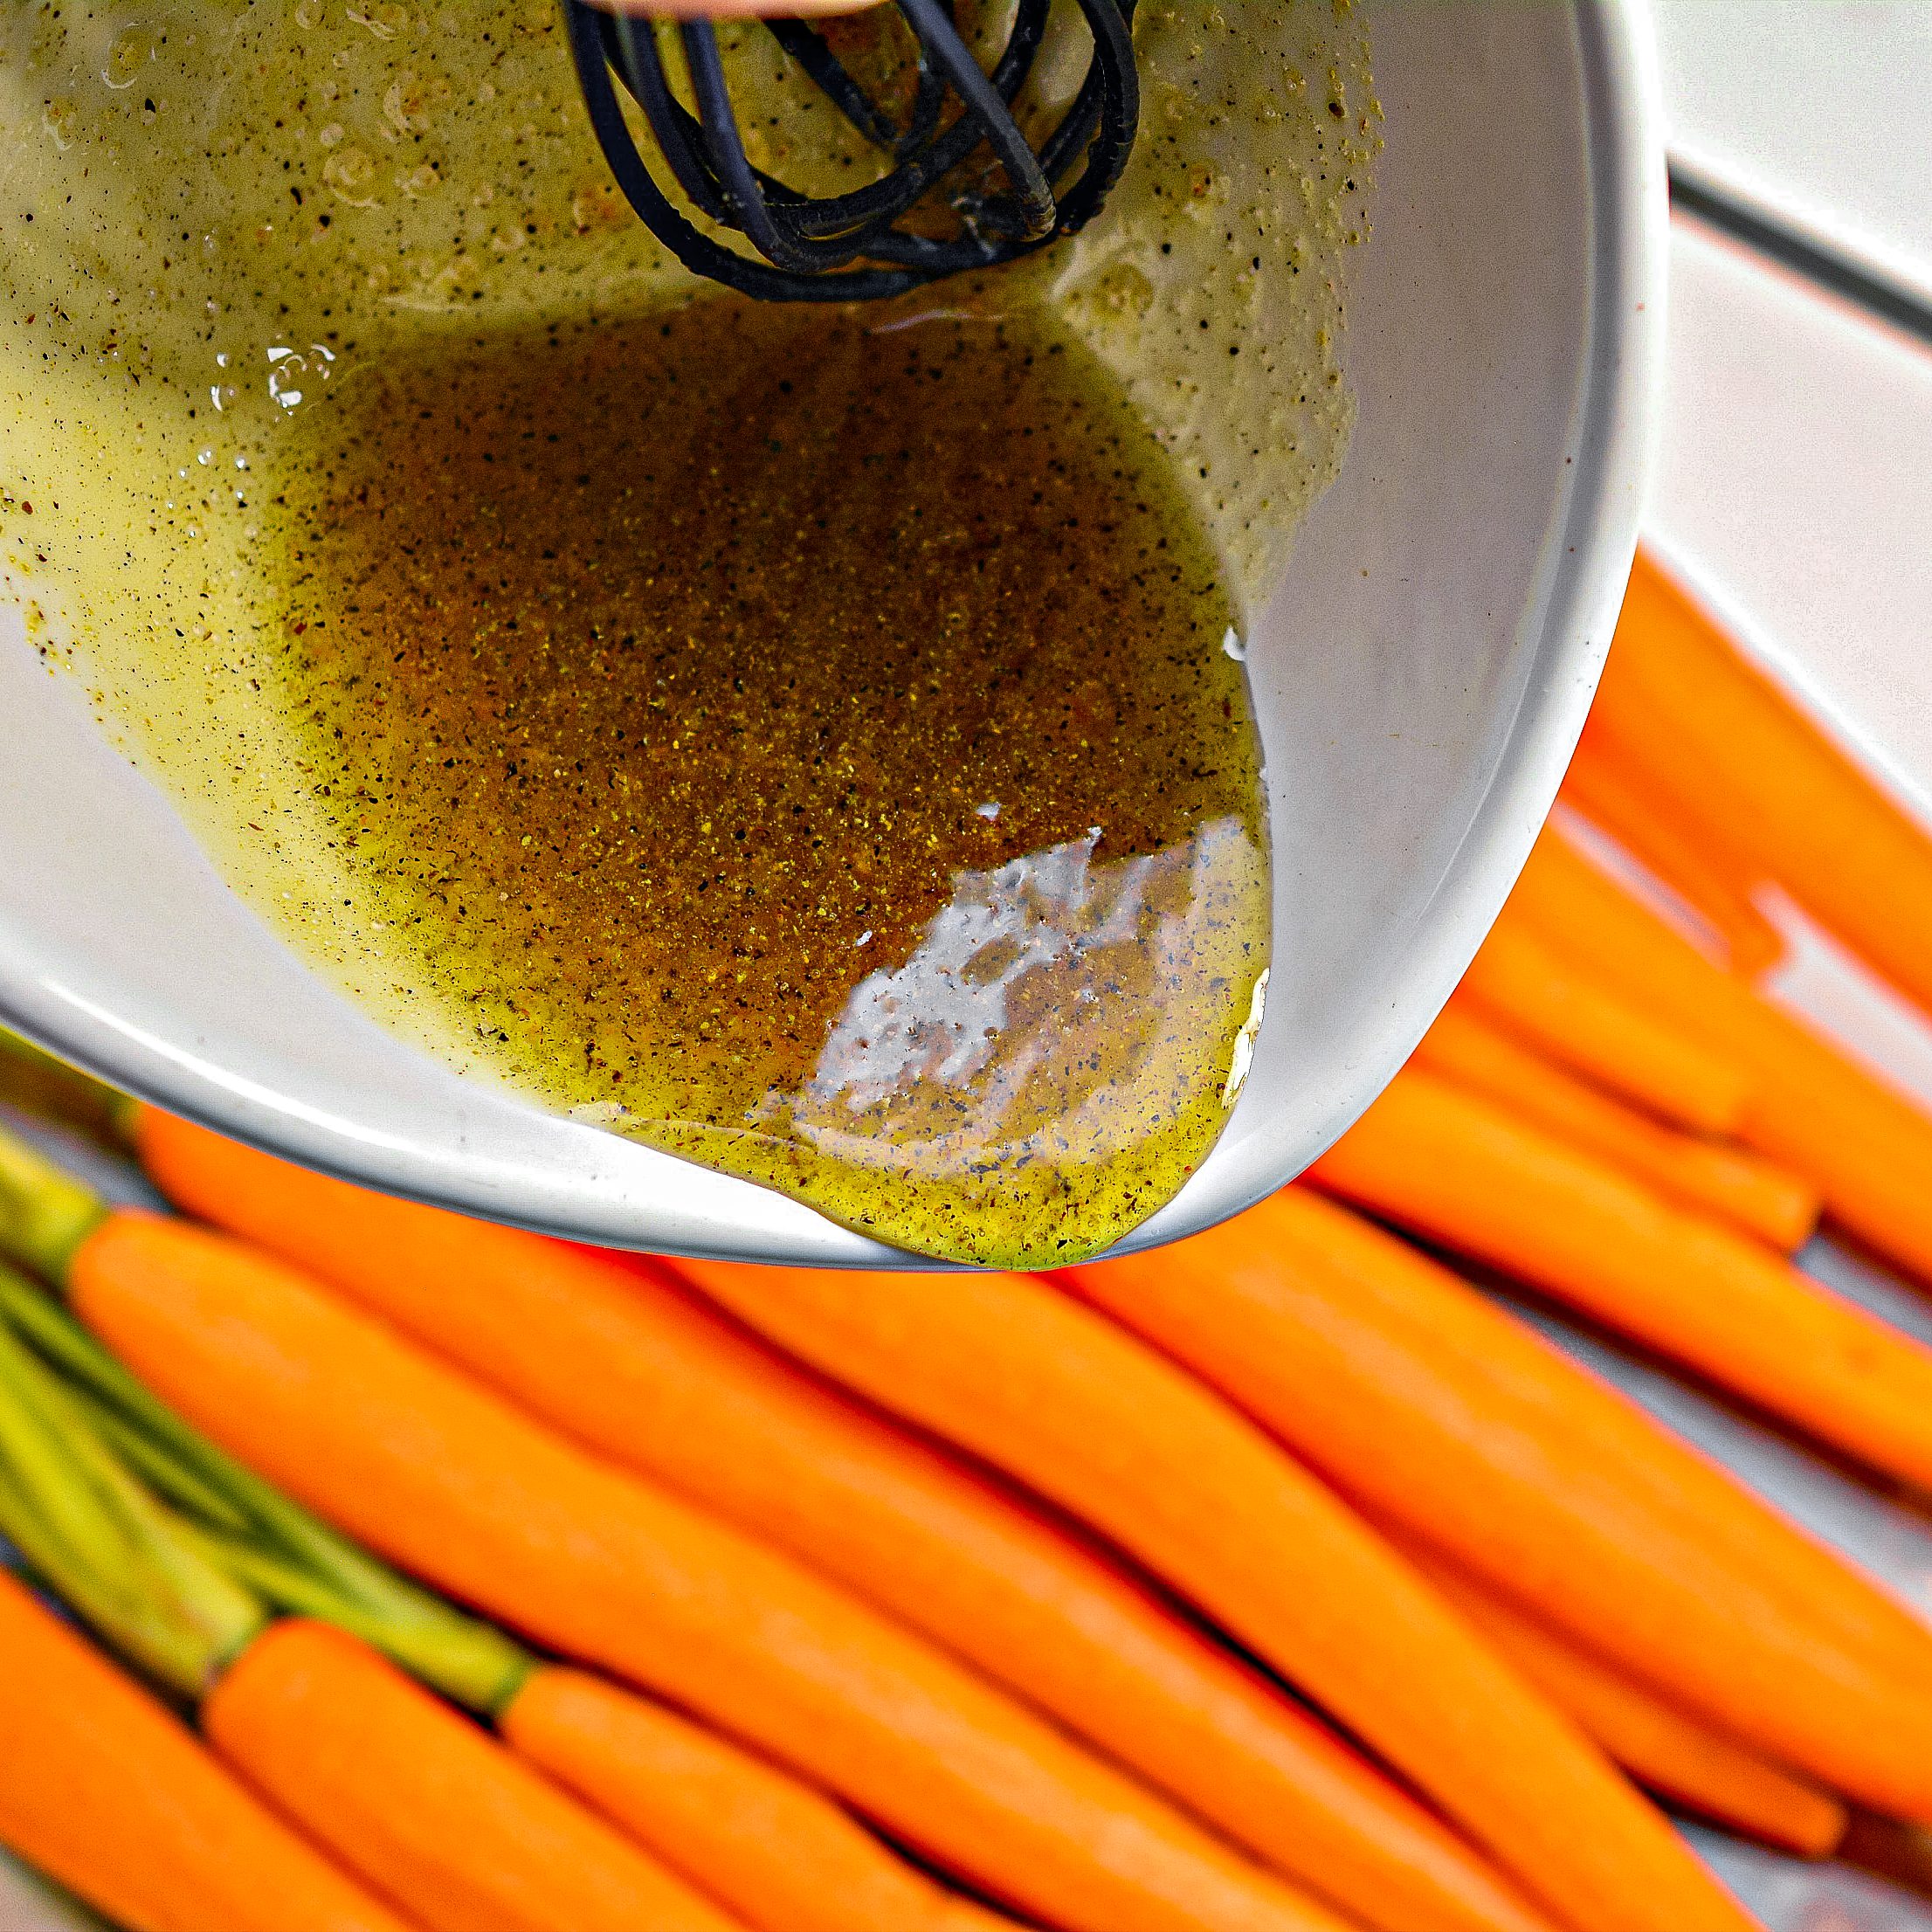 Pour the mixture over the carrots in the dish, and toss to coat well.